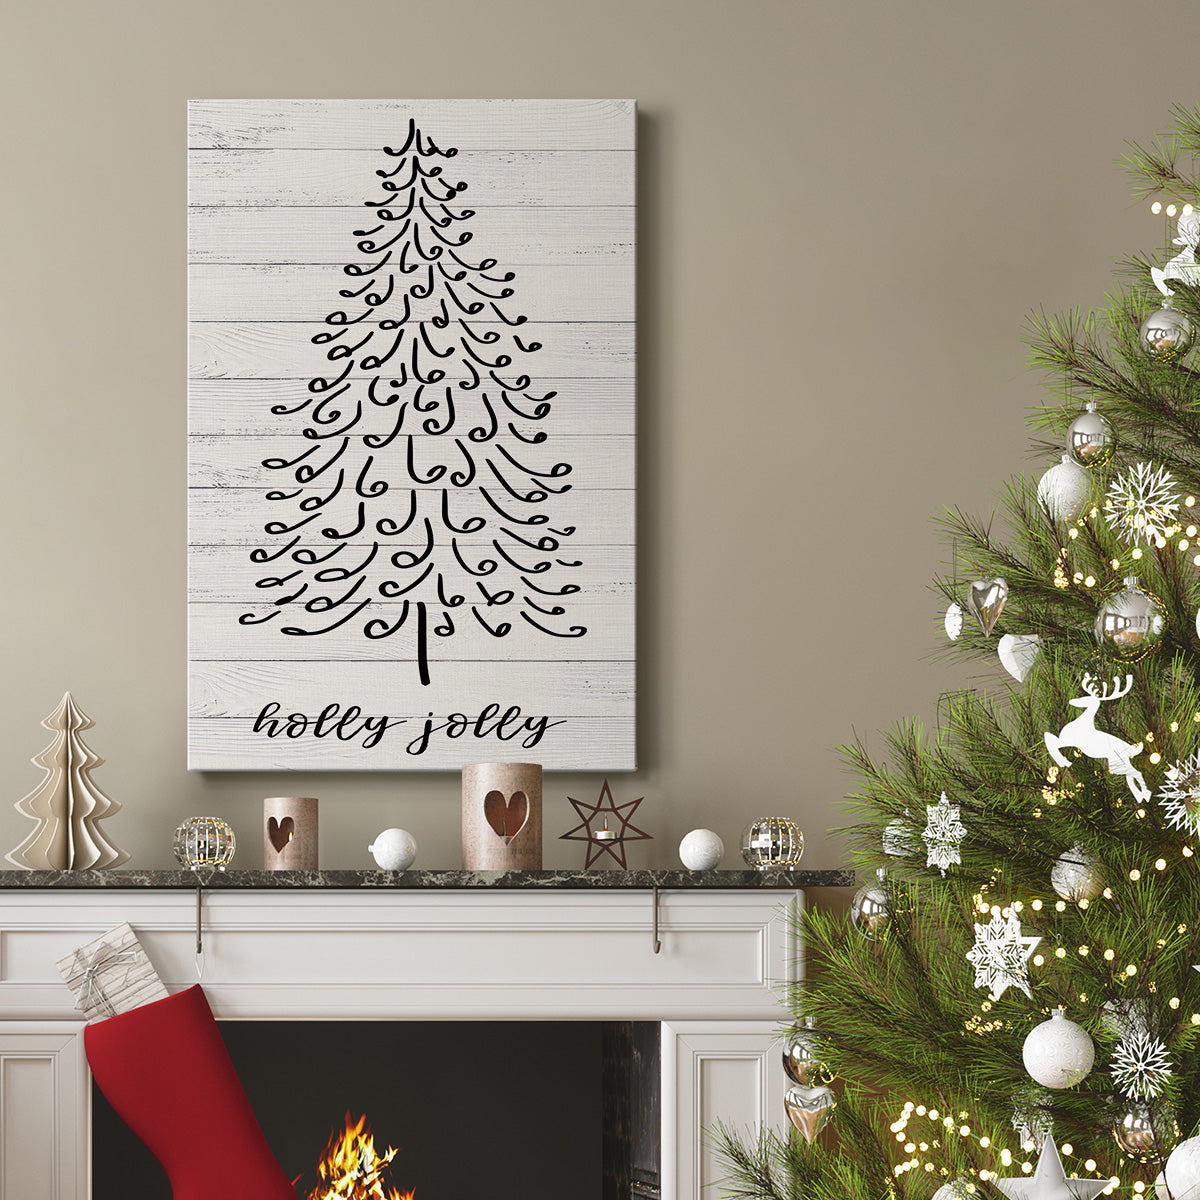 Holly Jolly - Gallery Wrapped Canvas